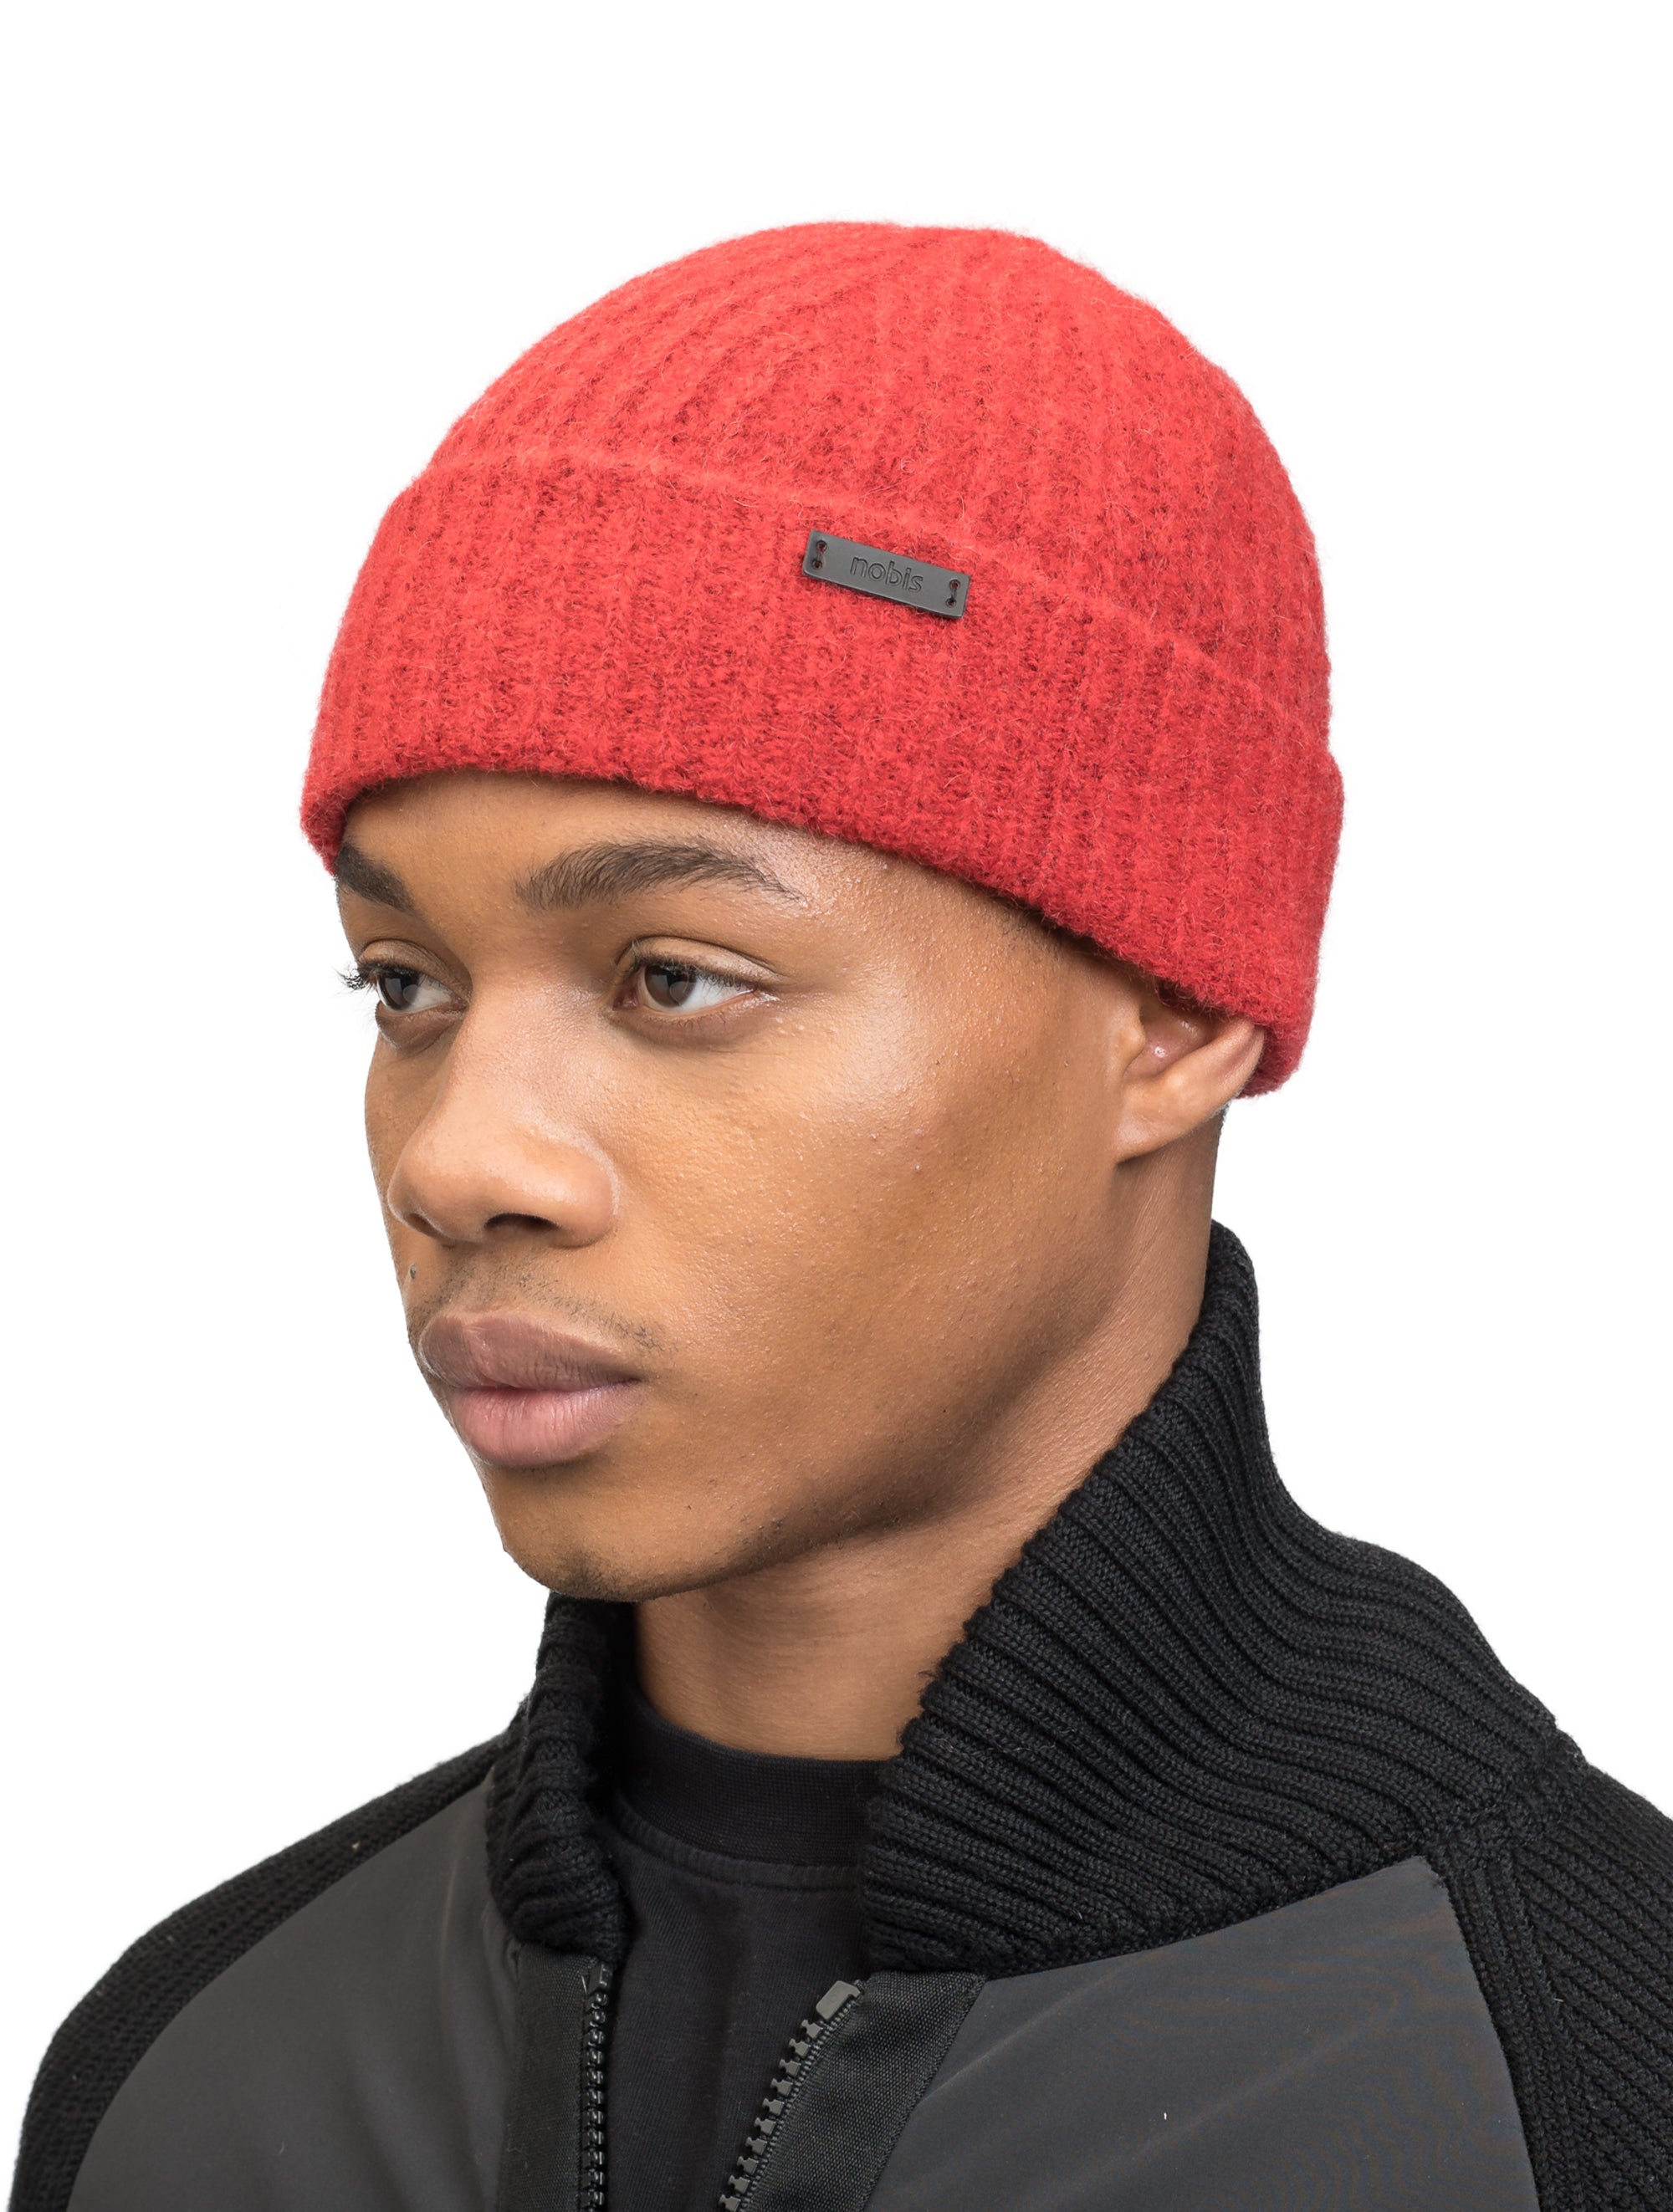 Buy Youth Whirlibird Watch Cap Online at Columbia